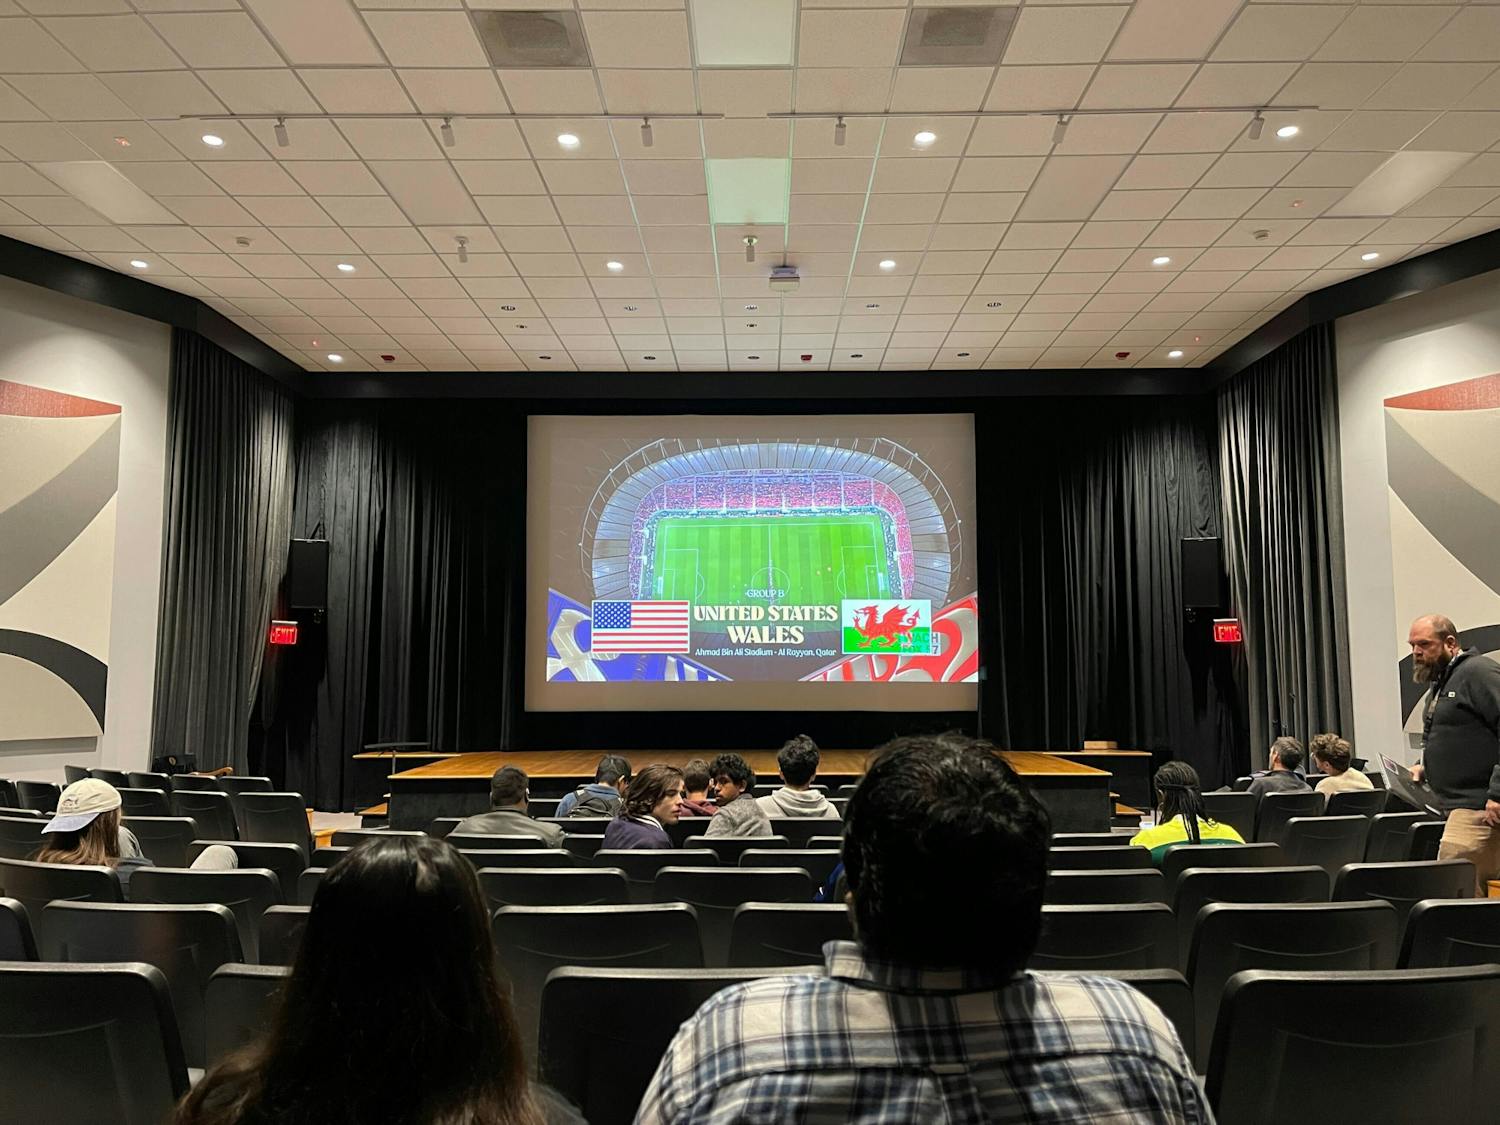 USC students gather at Russell House Theater to watch the United States’ World Cup group stage match against Wales on Nov. 21, 2022. Watch parties for World Cup matches have been organized by Carolina Productions and the Residence Hall Association.